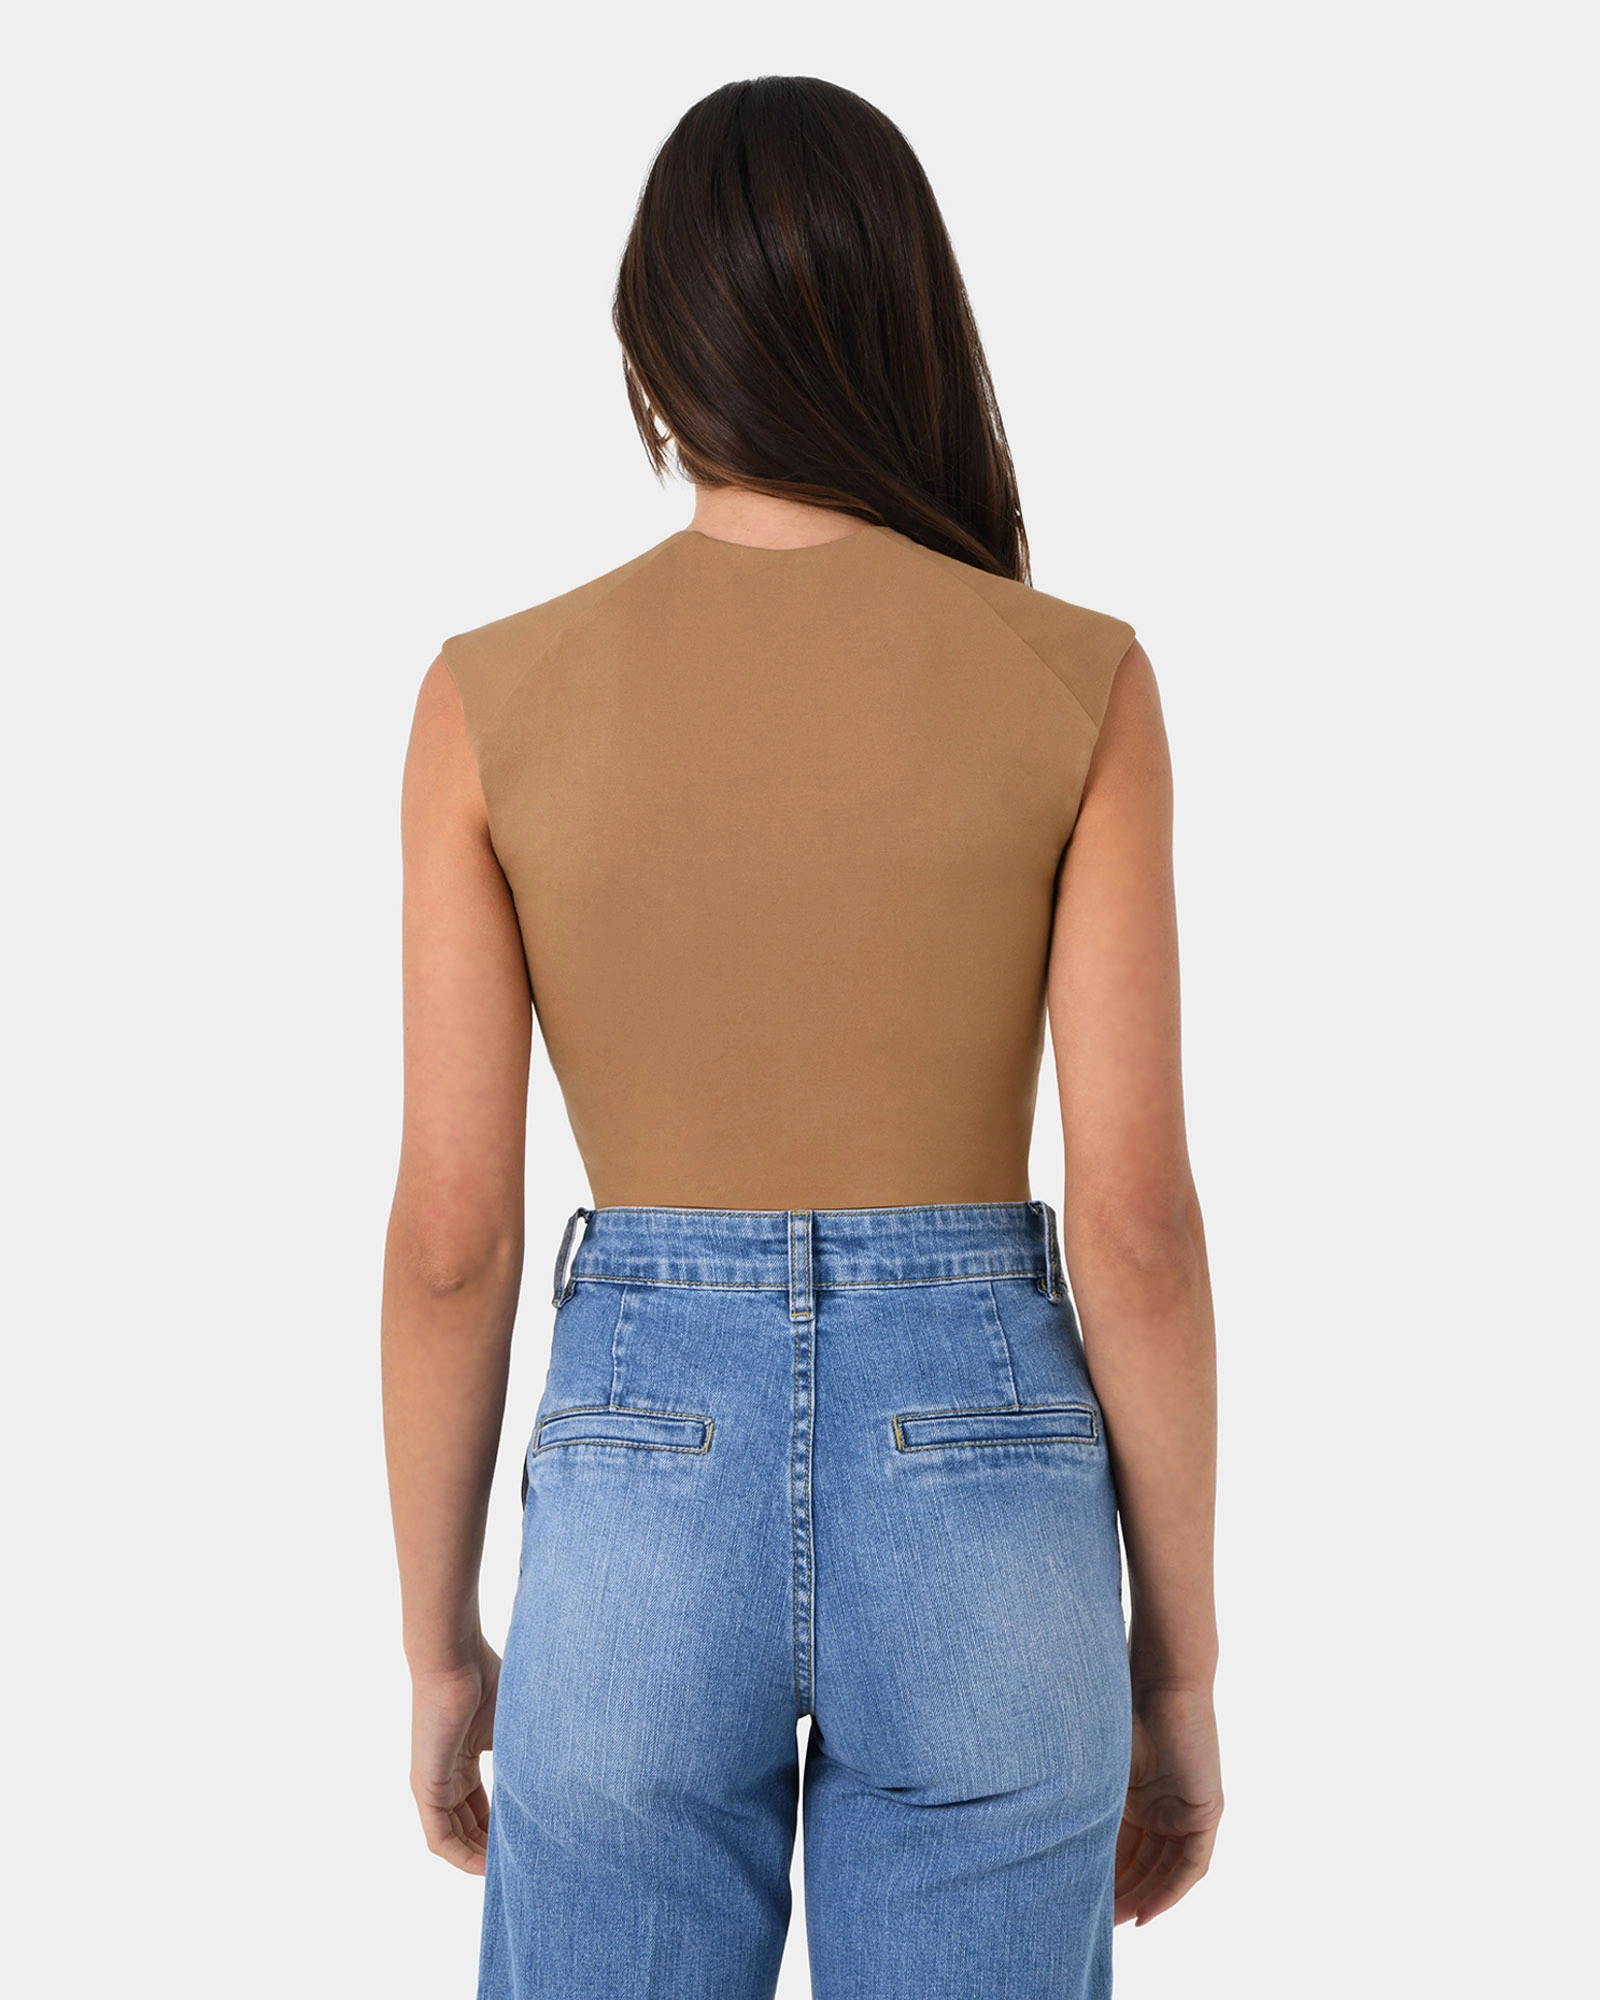 Soho Rounded Square Neck Top